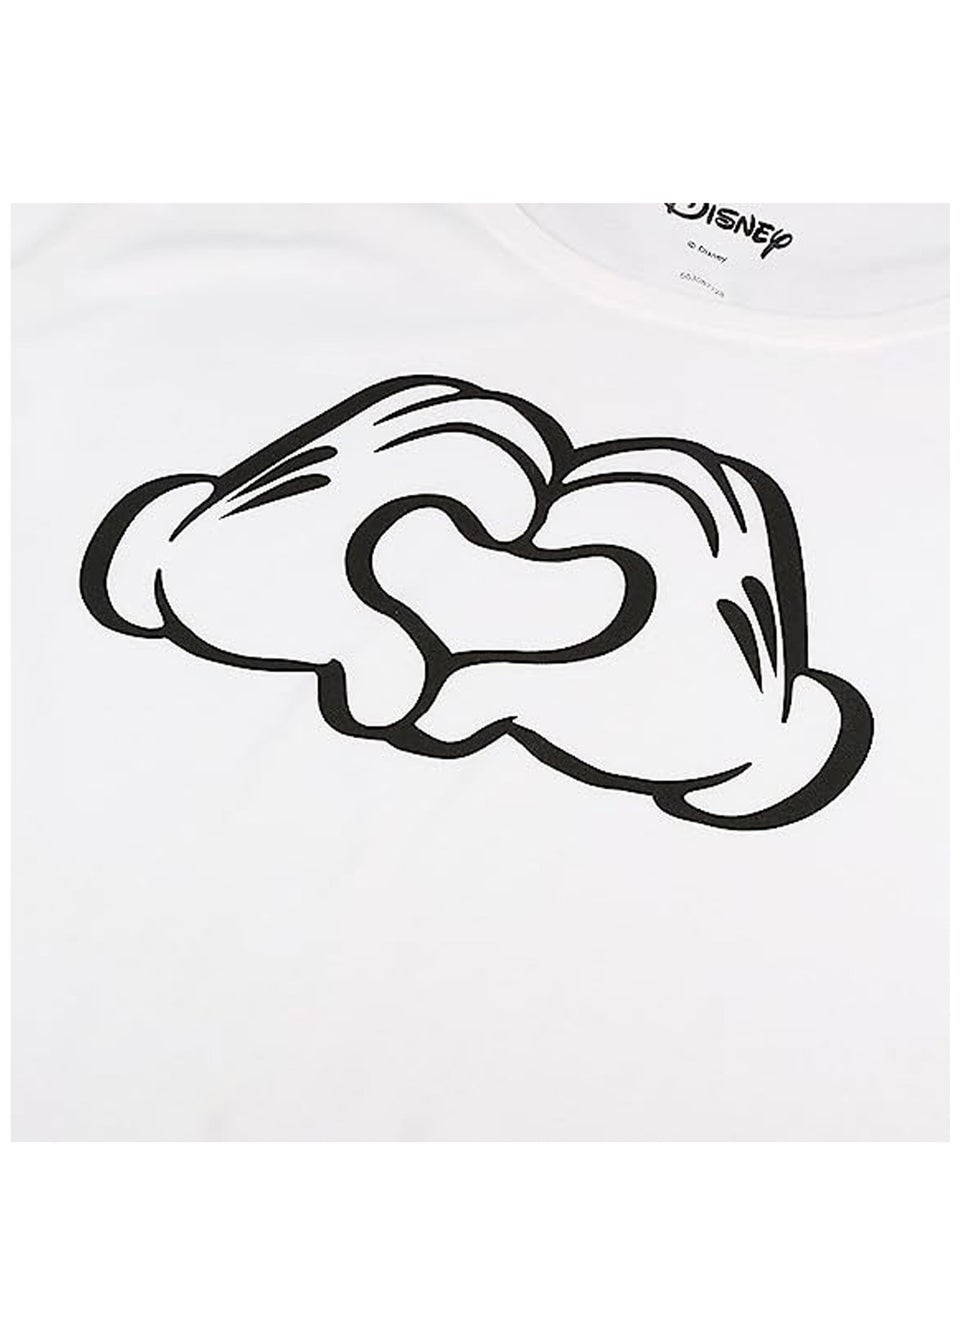 Disney White Love Hands Mickey Mouse T-Shirt